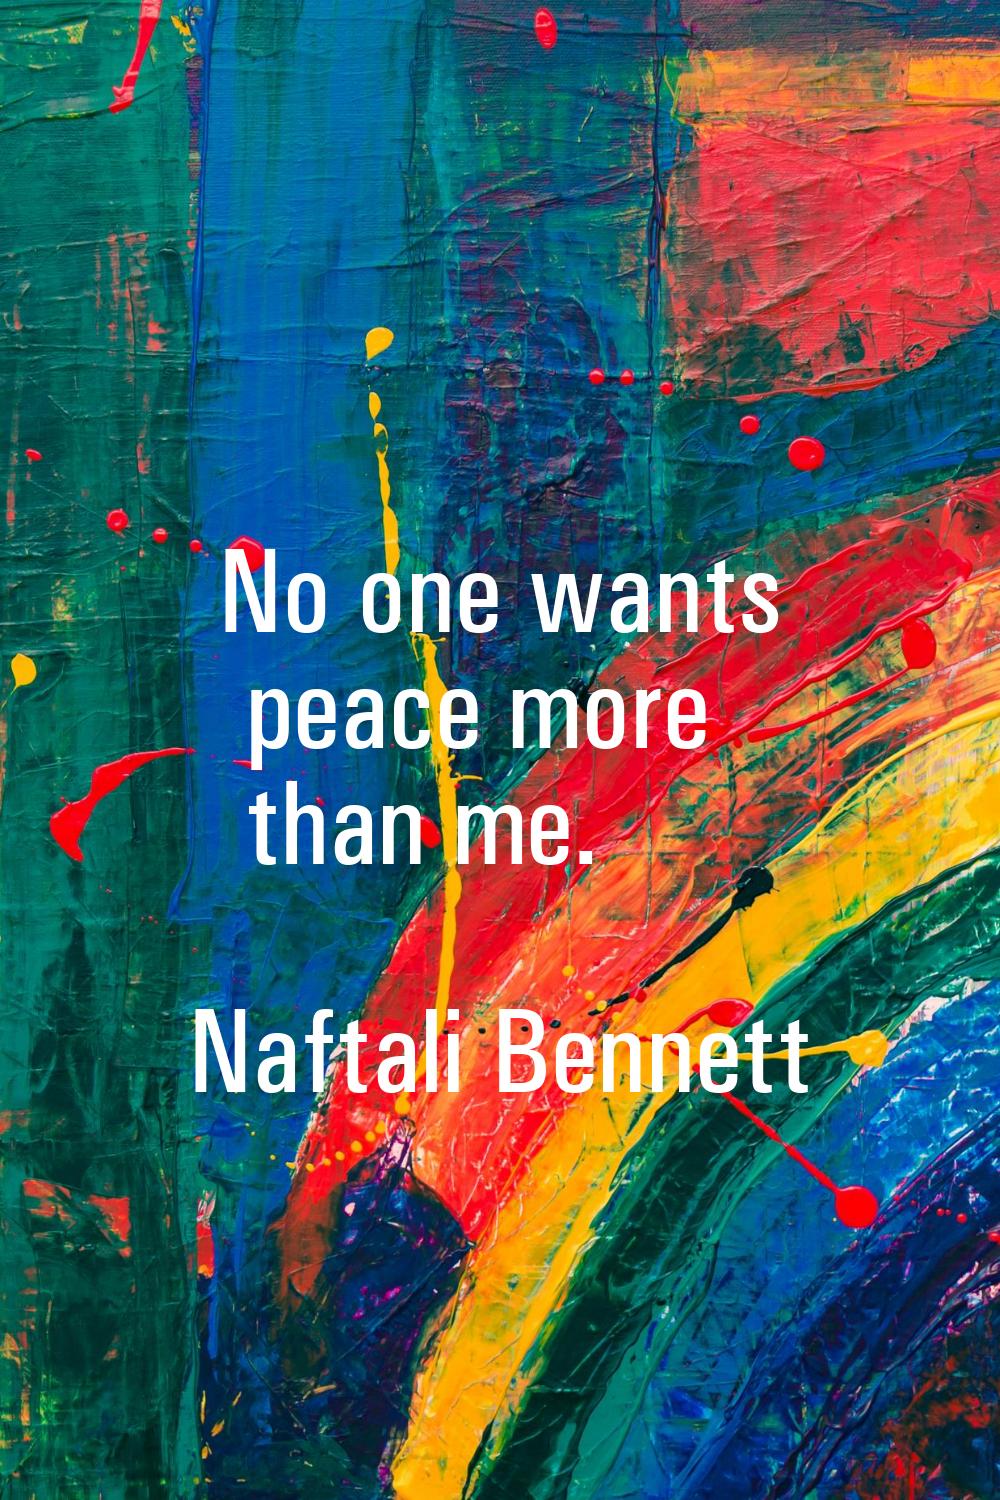 No one wants peace more than me.